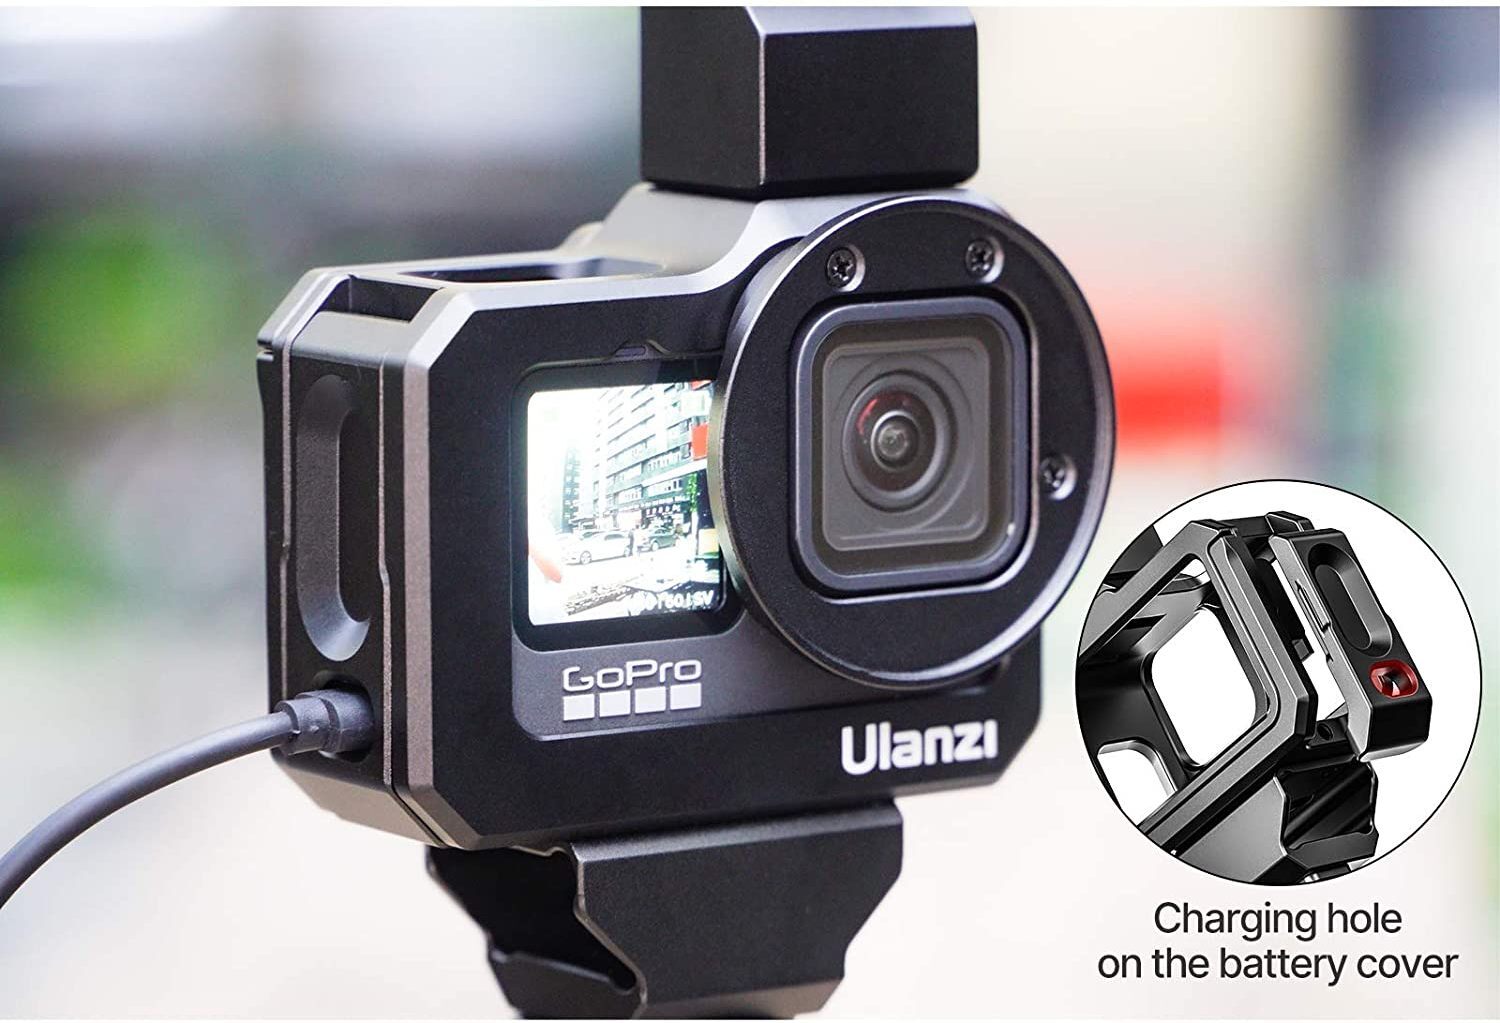 ULANZI G9-5 Housing Case for Gopro Hero 12 11 10 9, Aluminum Video Cage  with 2 Cold Shoe Mount for Mic and Led Light, Protective Frame with 52mm